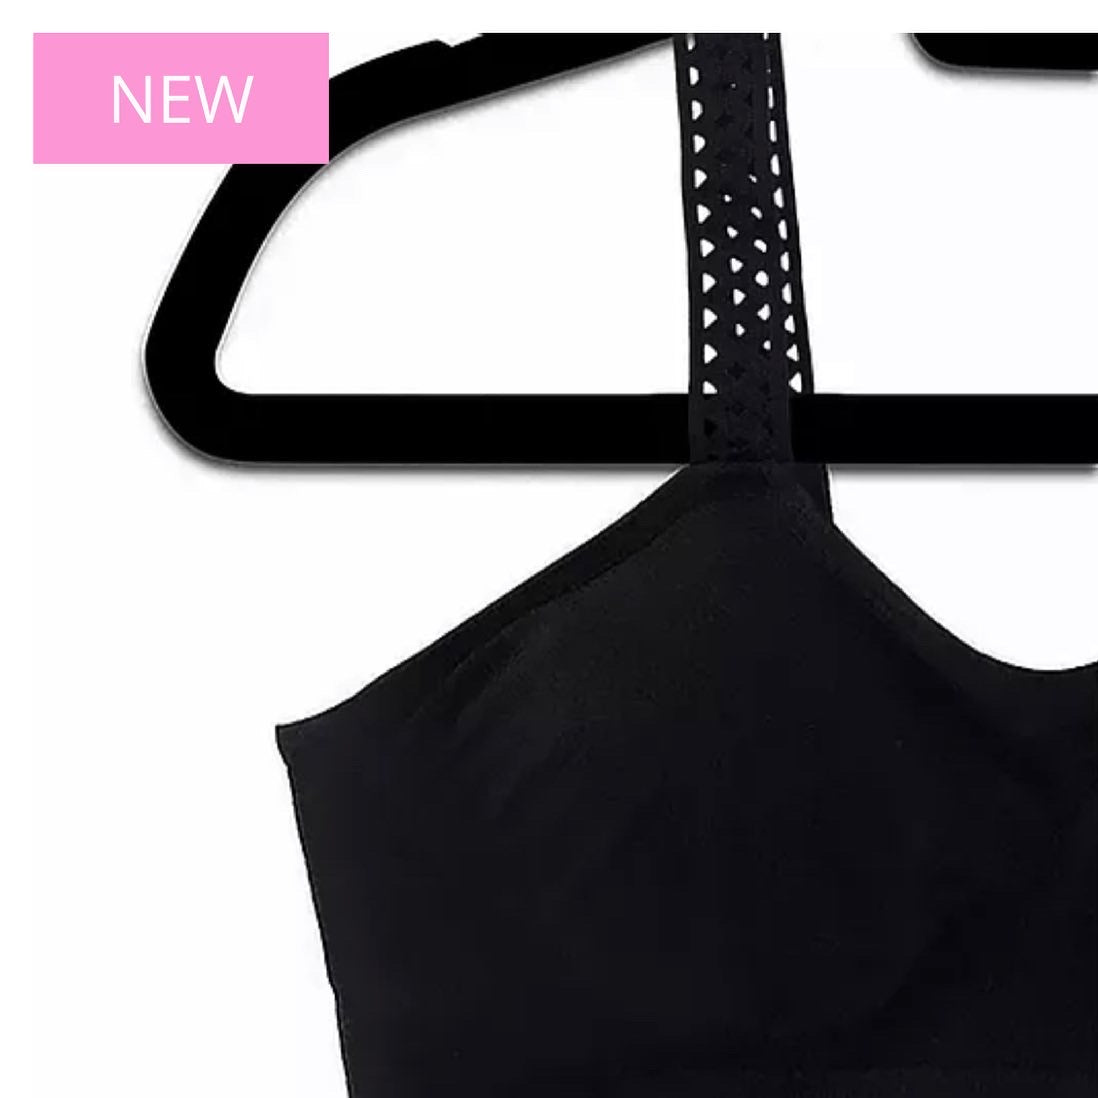 TOP SELLER! Strap it bras with attached straps - Black with lattice strap - Lisa’s Northbrook